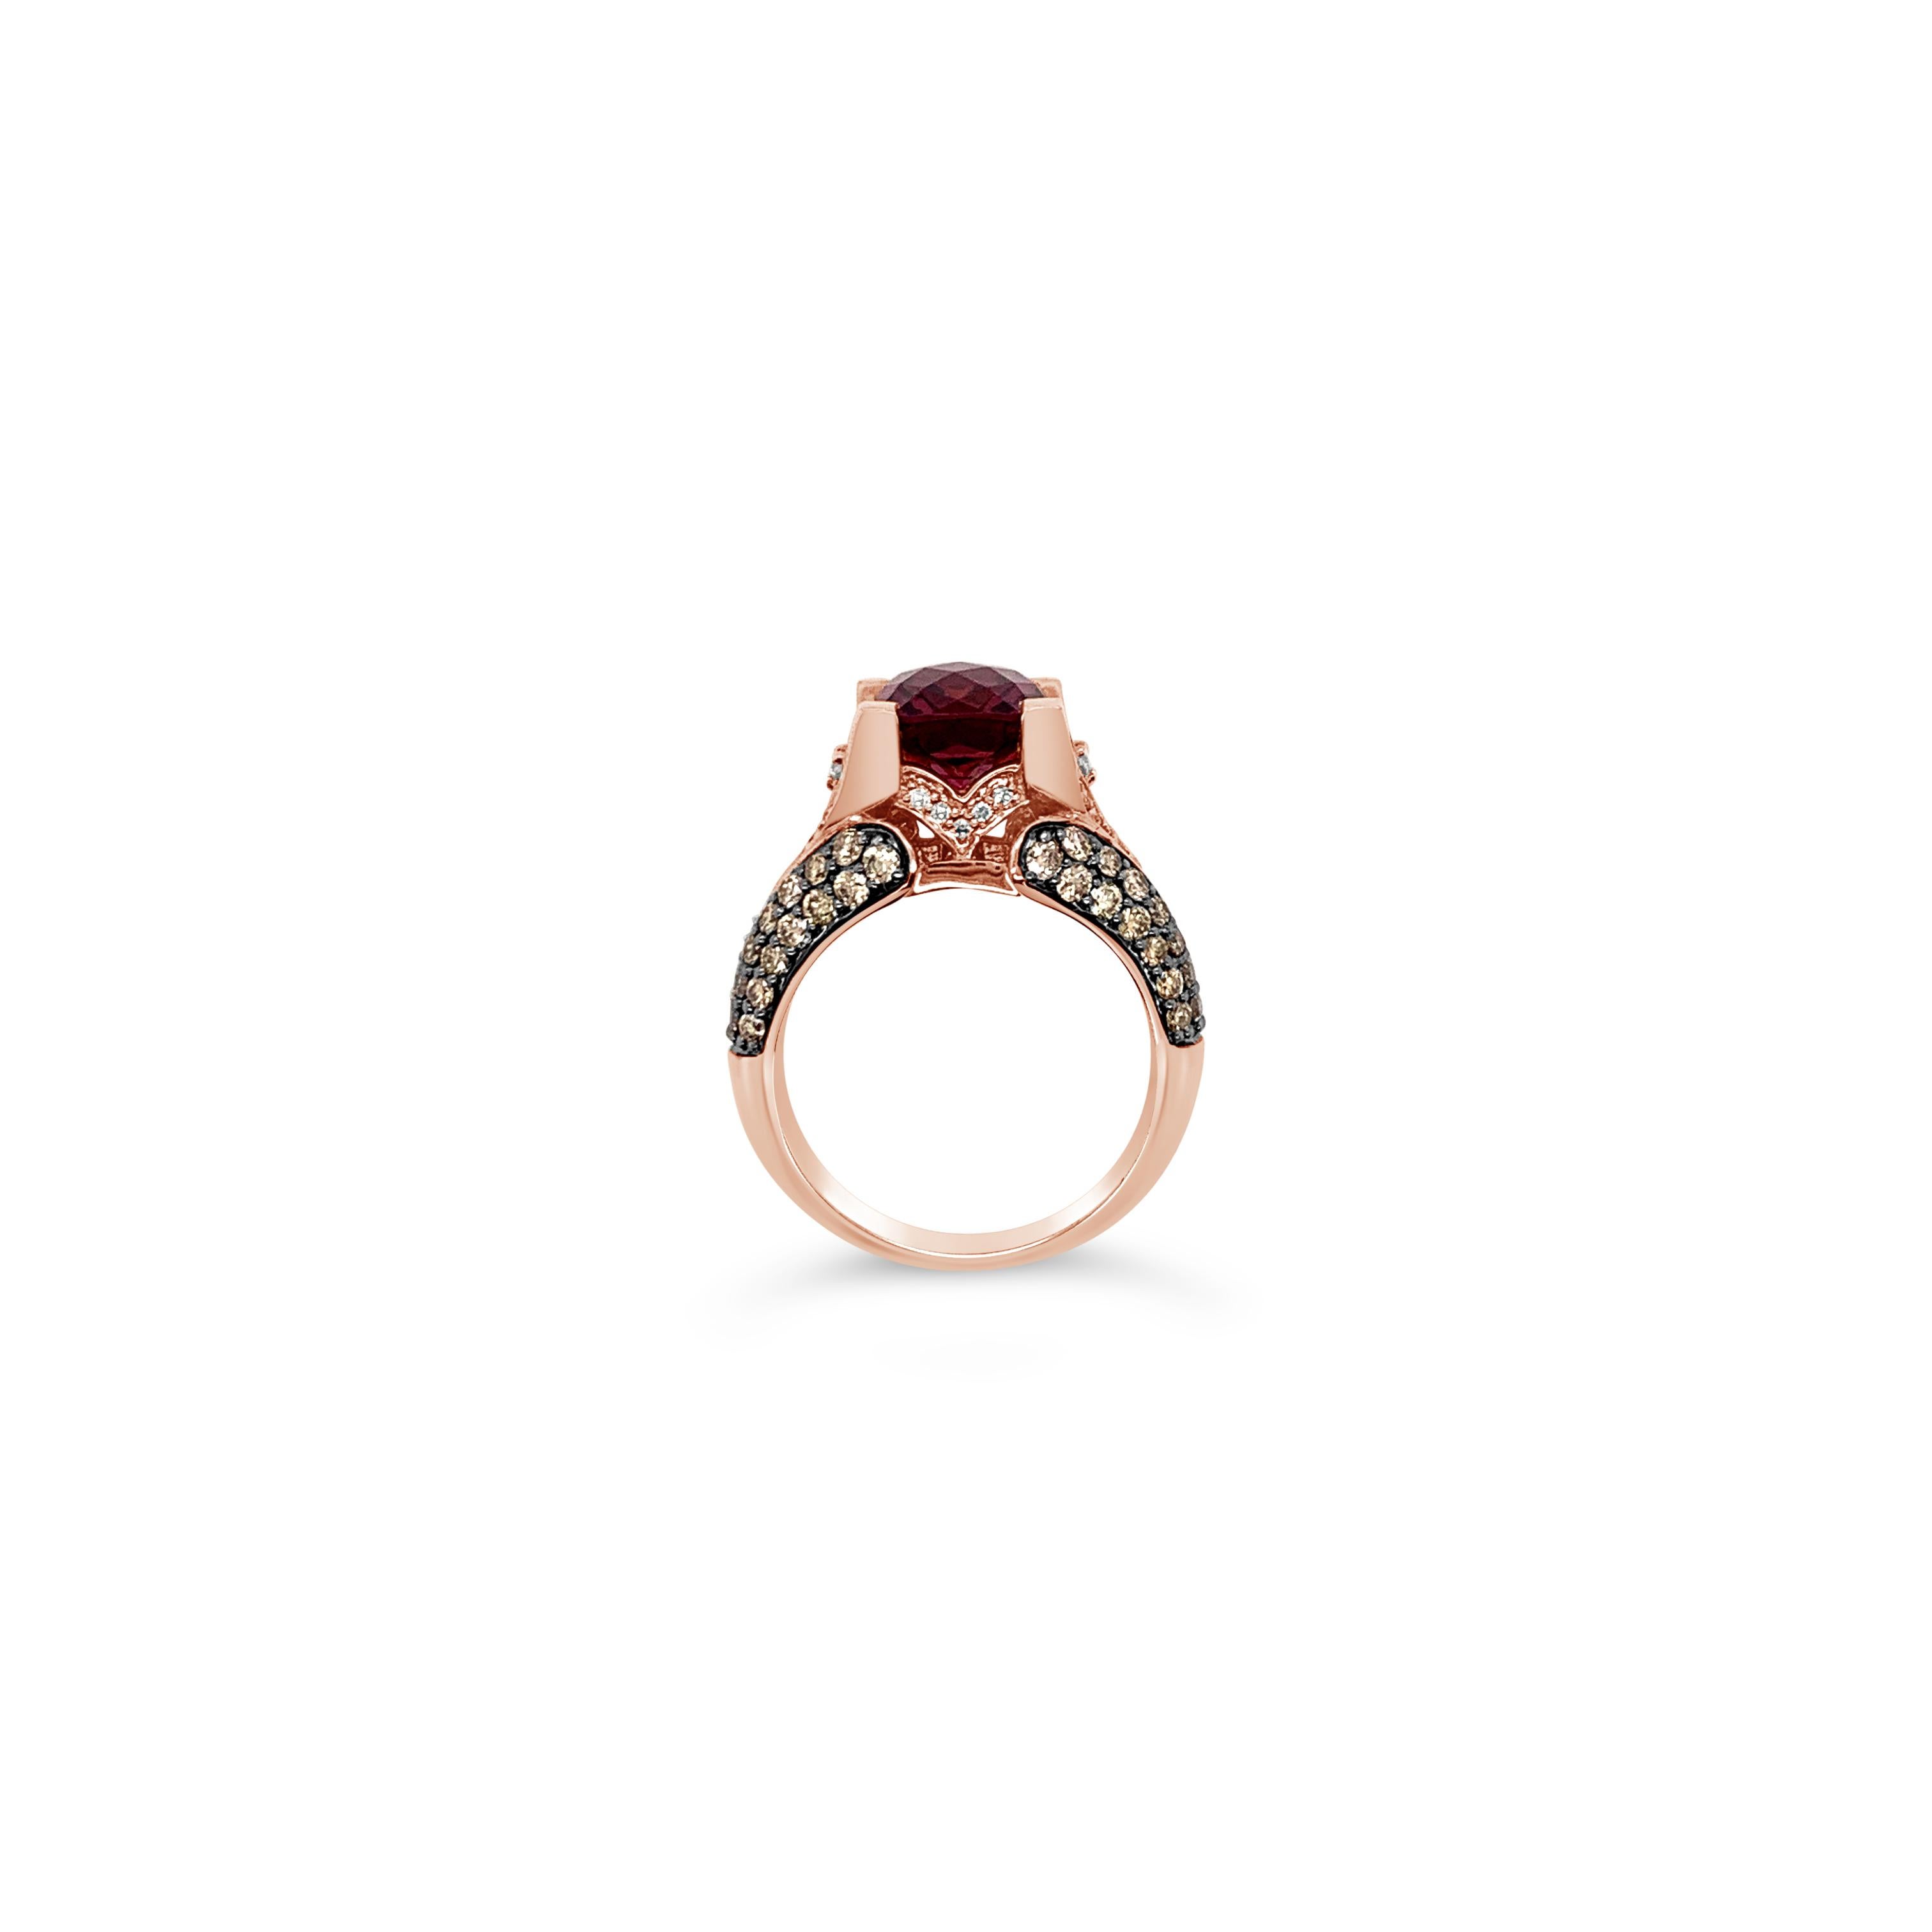 Le Vian Red Carpet® Ring featuring 3.15 cts. Raspberry Rhodolite®, 1.00 cts. Chocolate Diamonds® , 0.19 cts. Vanilla Diamonds® set in 14K Strawberry Gold®

Diamonds Breakdown:
1.00 cts Brown Diamonds
.19 cts White Diamonds

Gems Breakdown:
3.15 cts